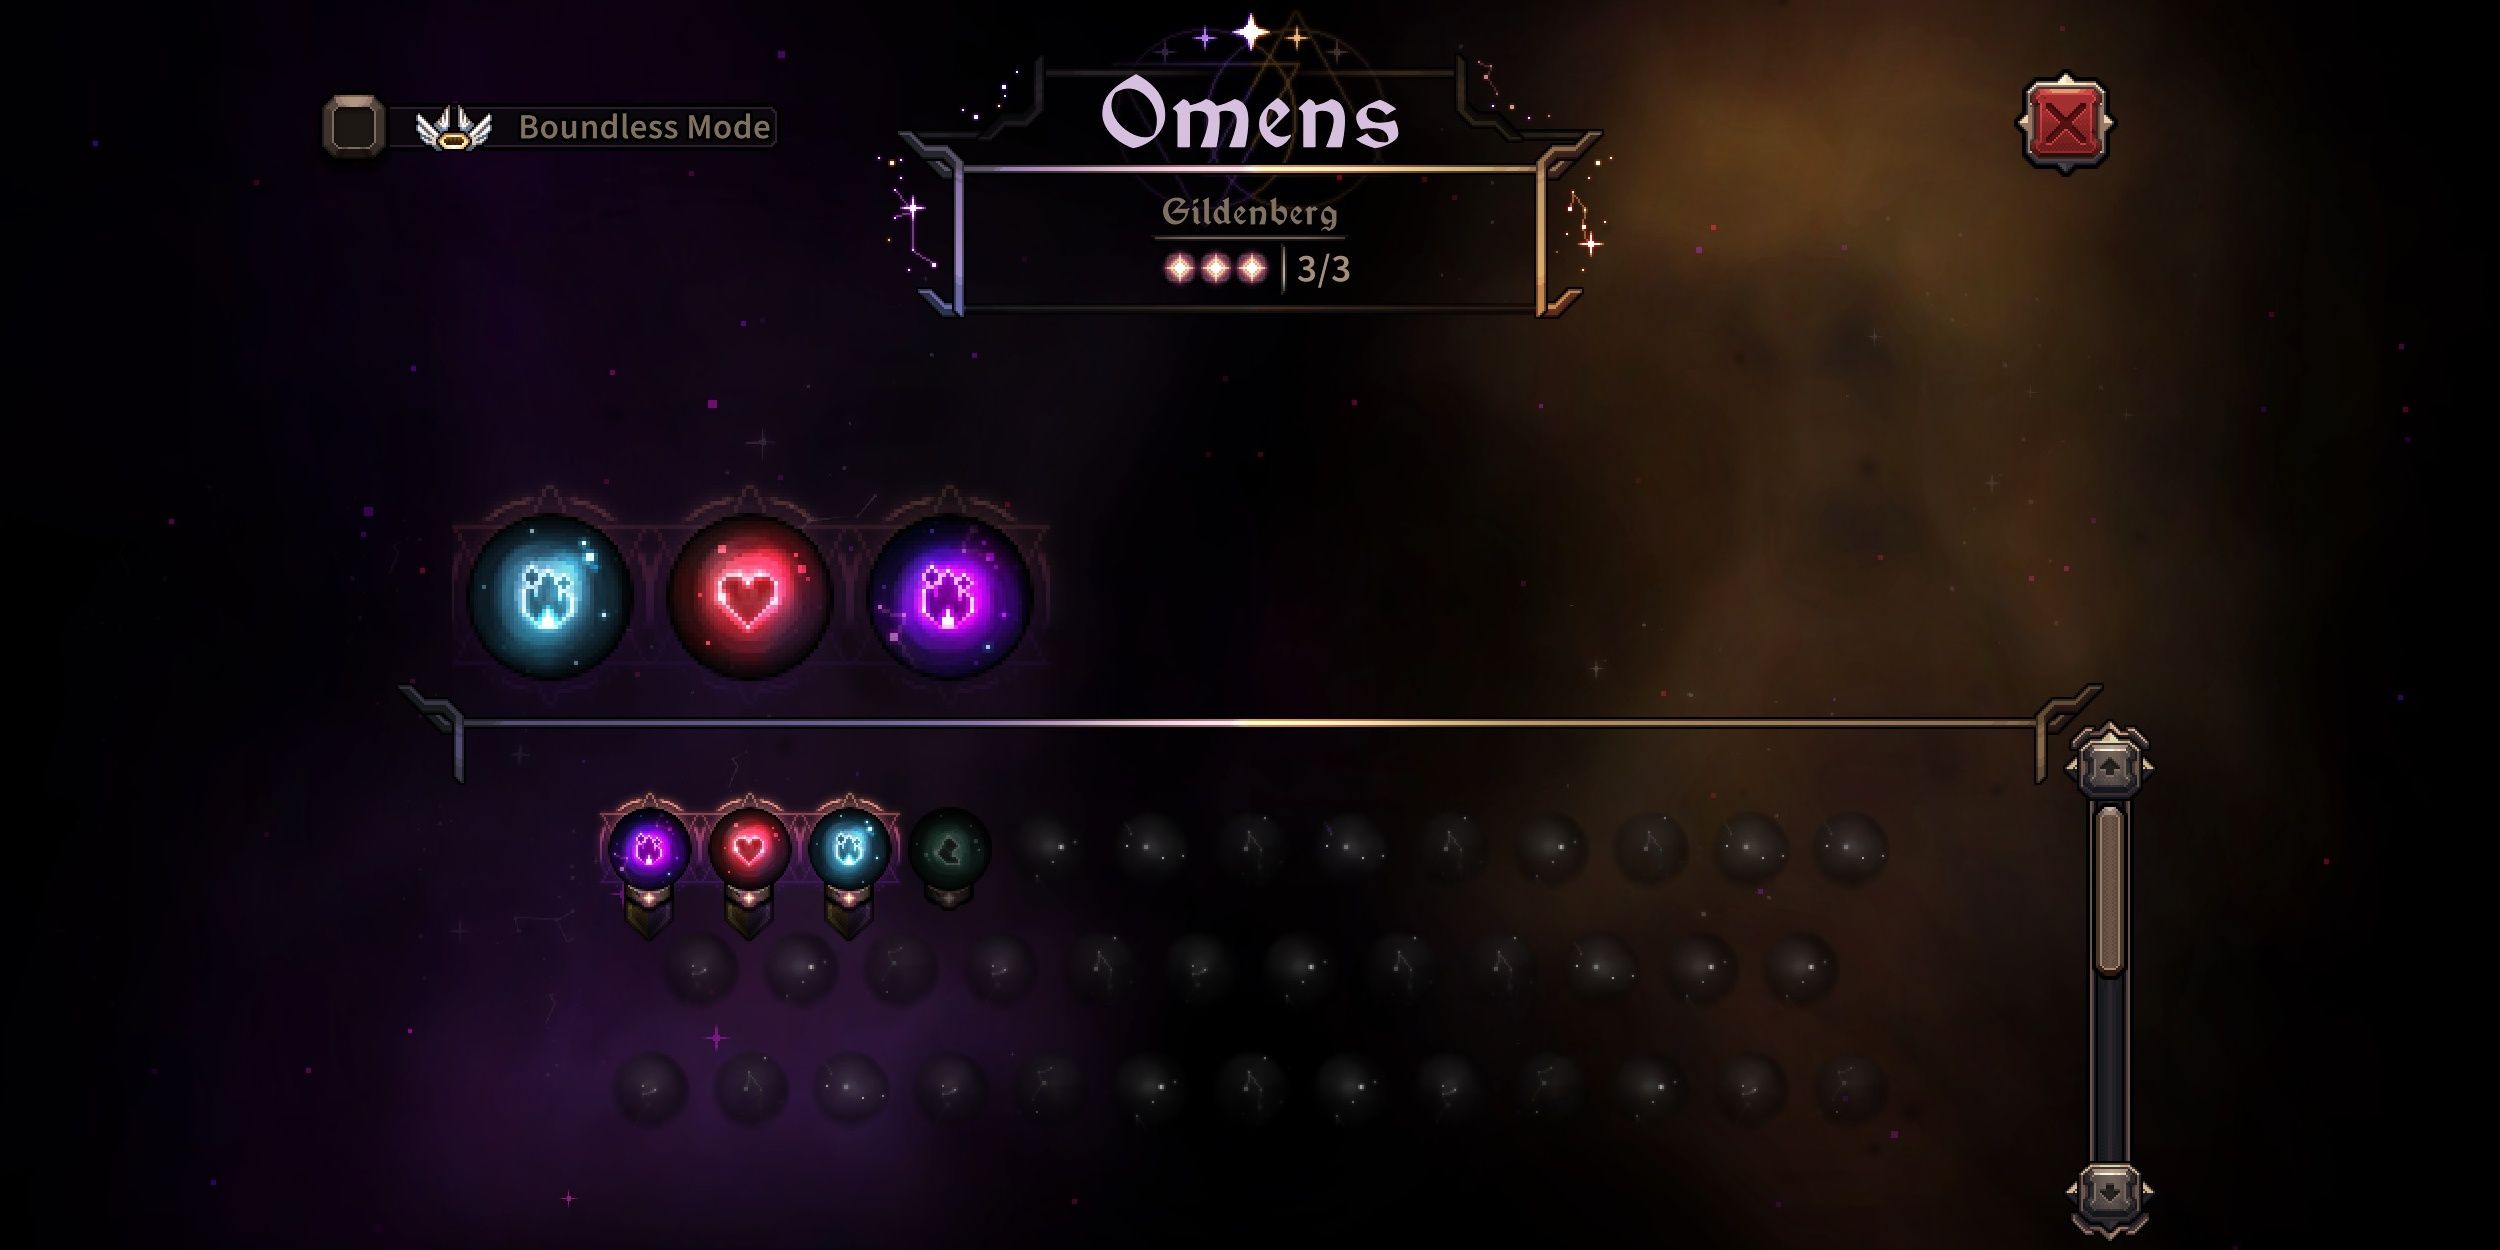 The Omens page, where you'll be picking up buffs for your coming attempt